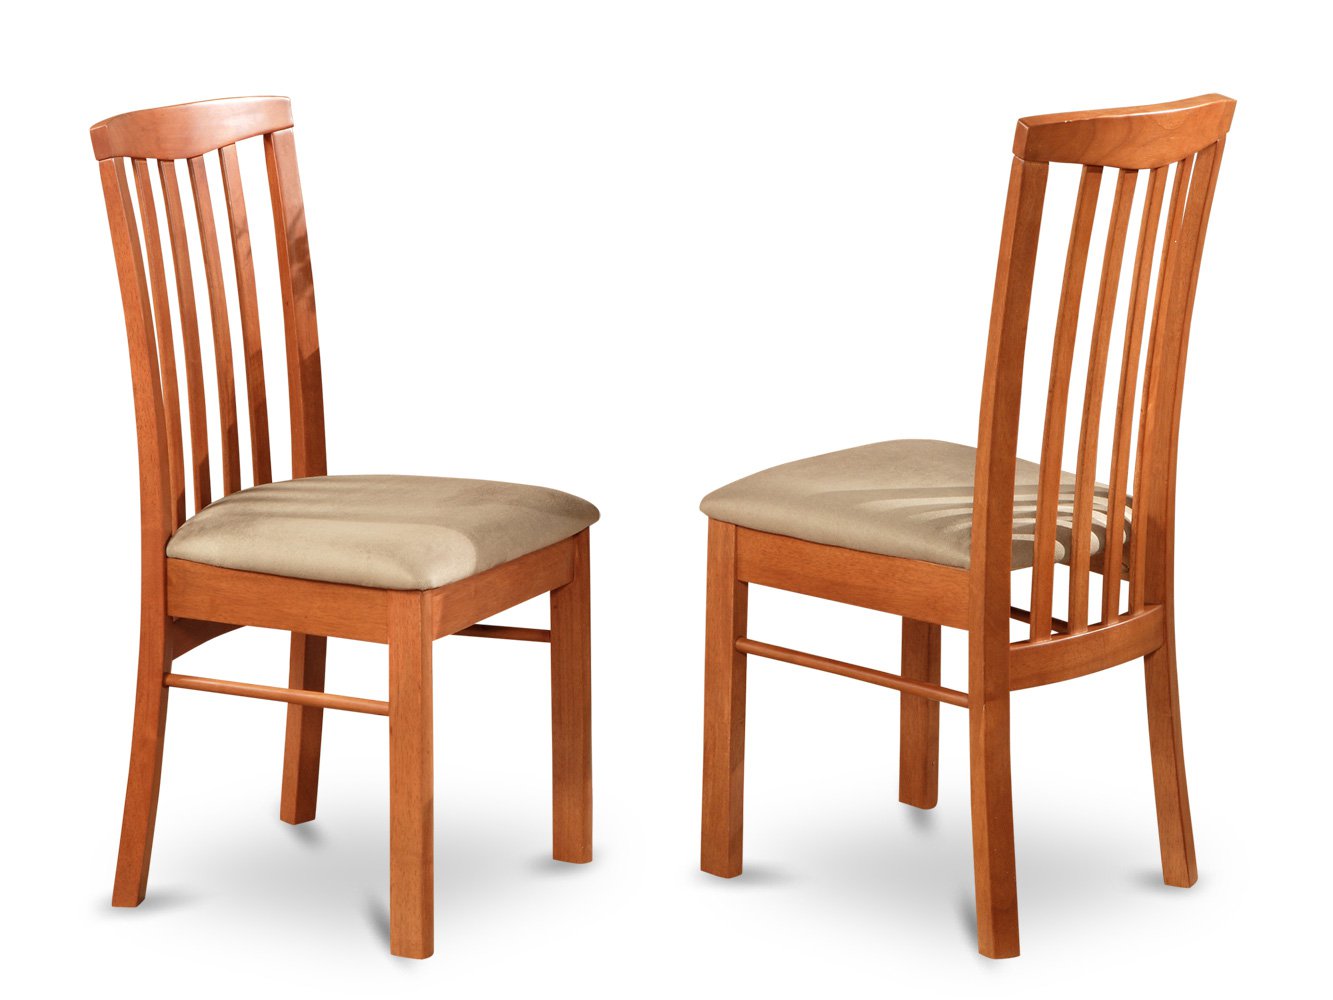 Set of 2 Hartland dining room chairs in Light Cherry finish.
